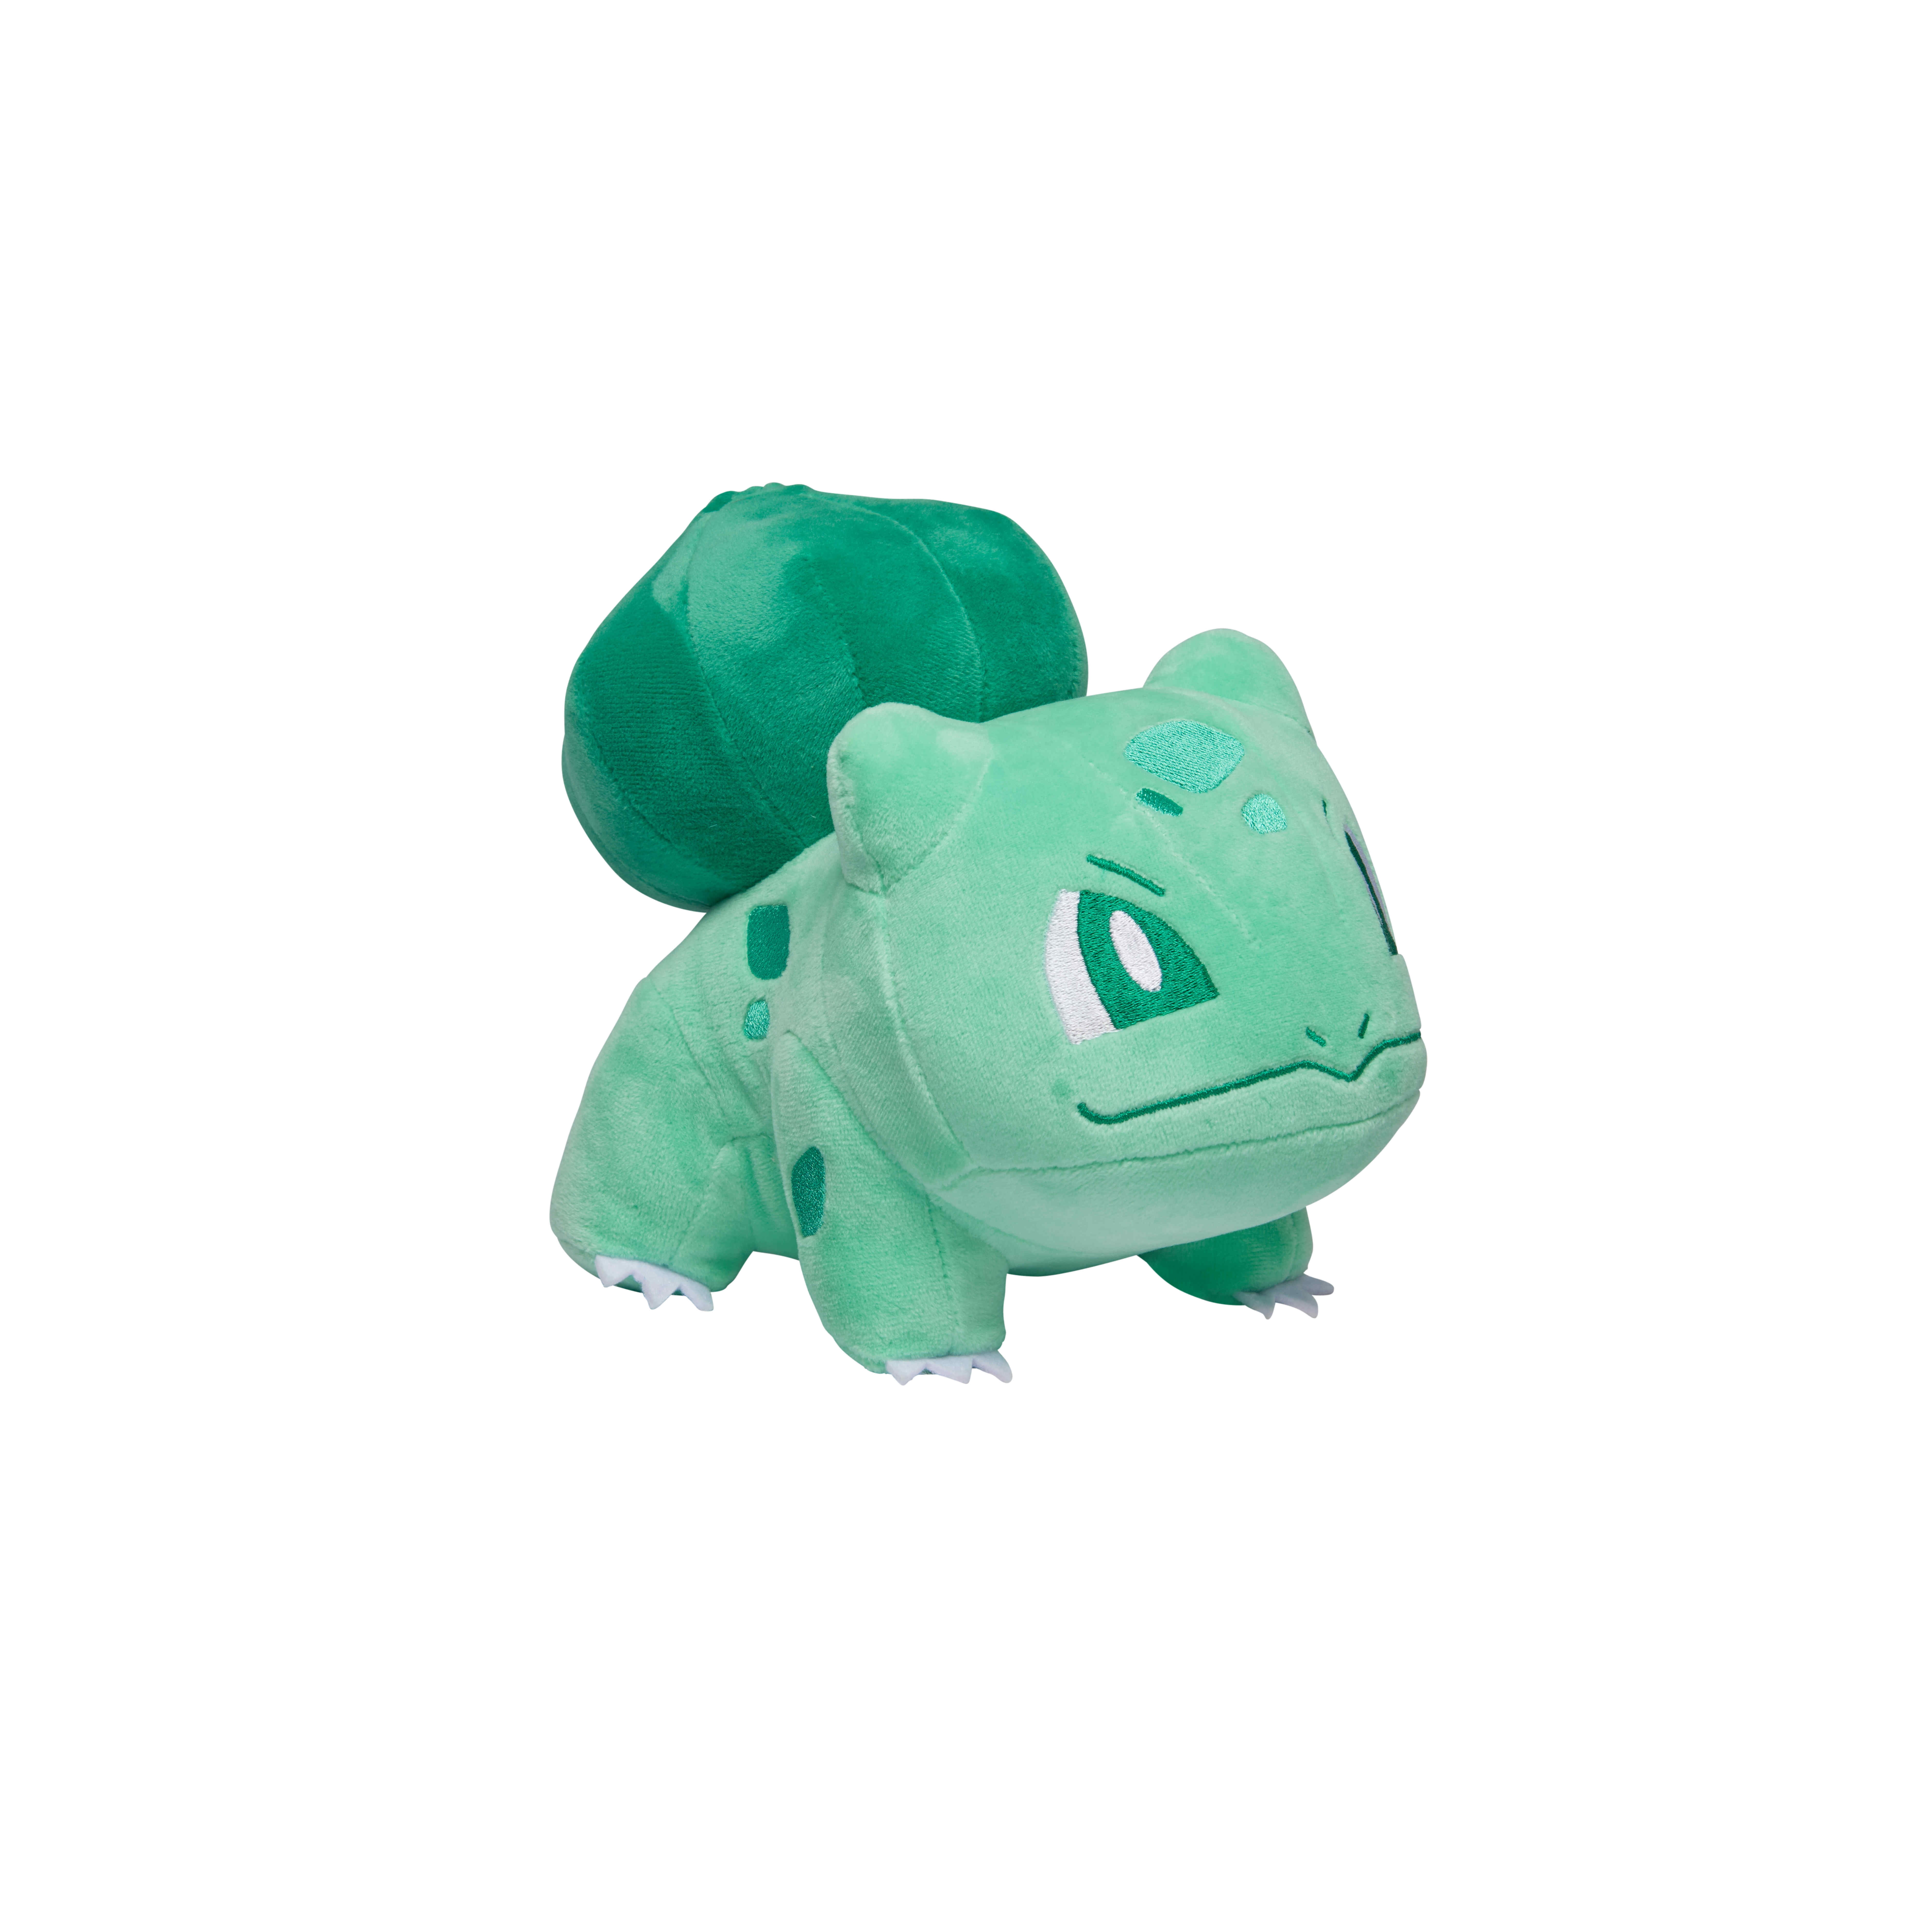 2020 Pokemon Select Shiny Bulbasaur Plush Wicked Cool Toys First Class for sale online 